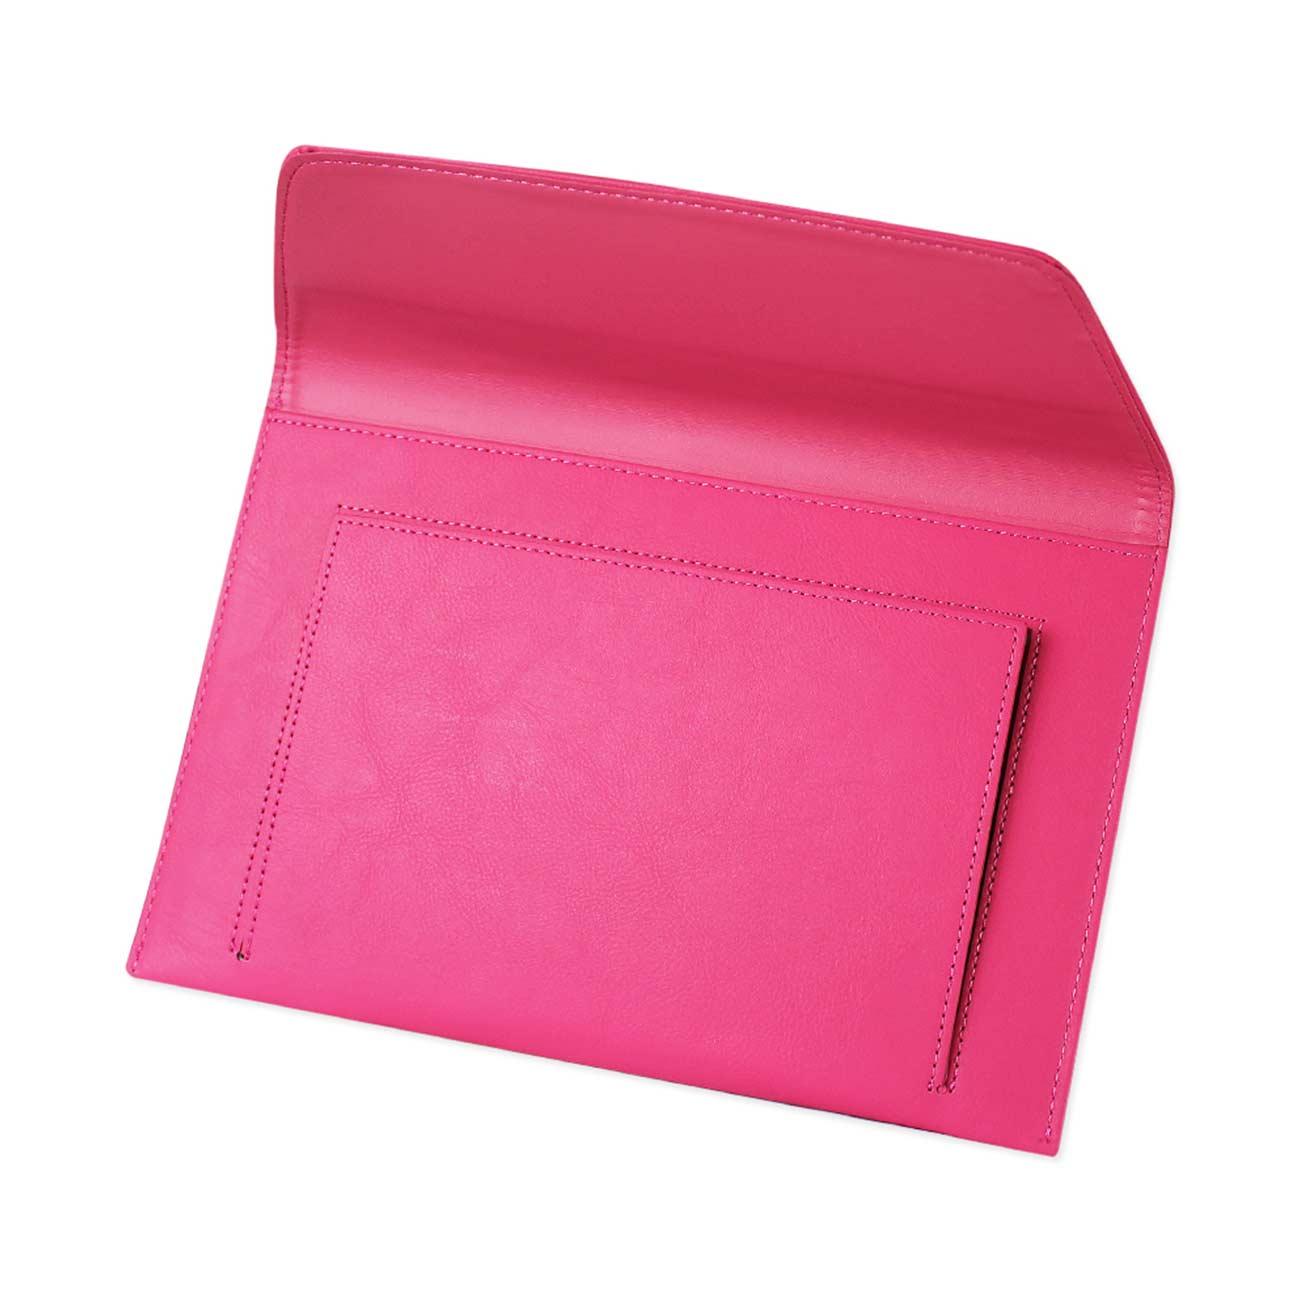 REIKO PREMIUM LEATHER CASE POUCH FOR 8.9INCHES IPADS AND TABLETS In HOT PINK